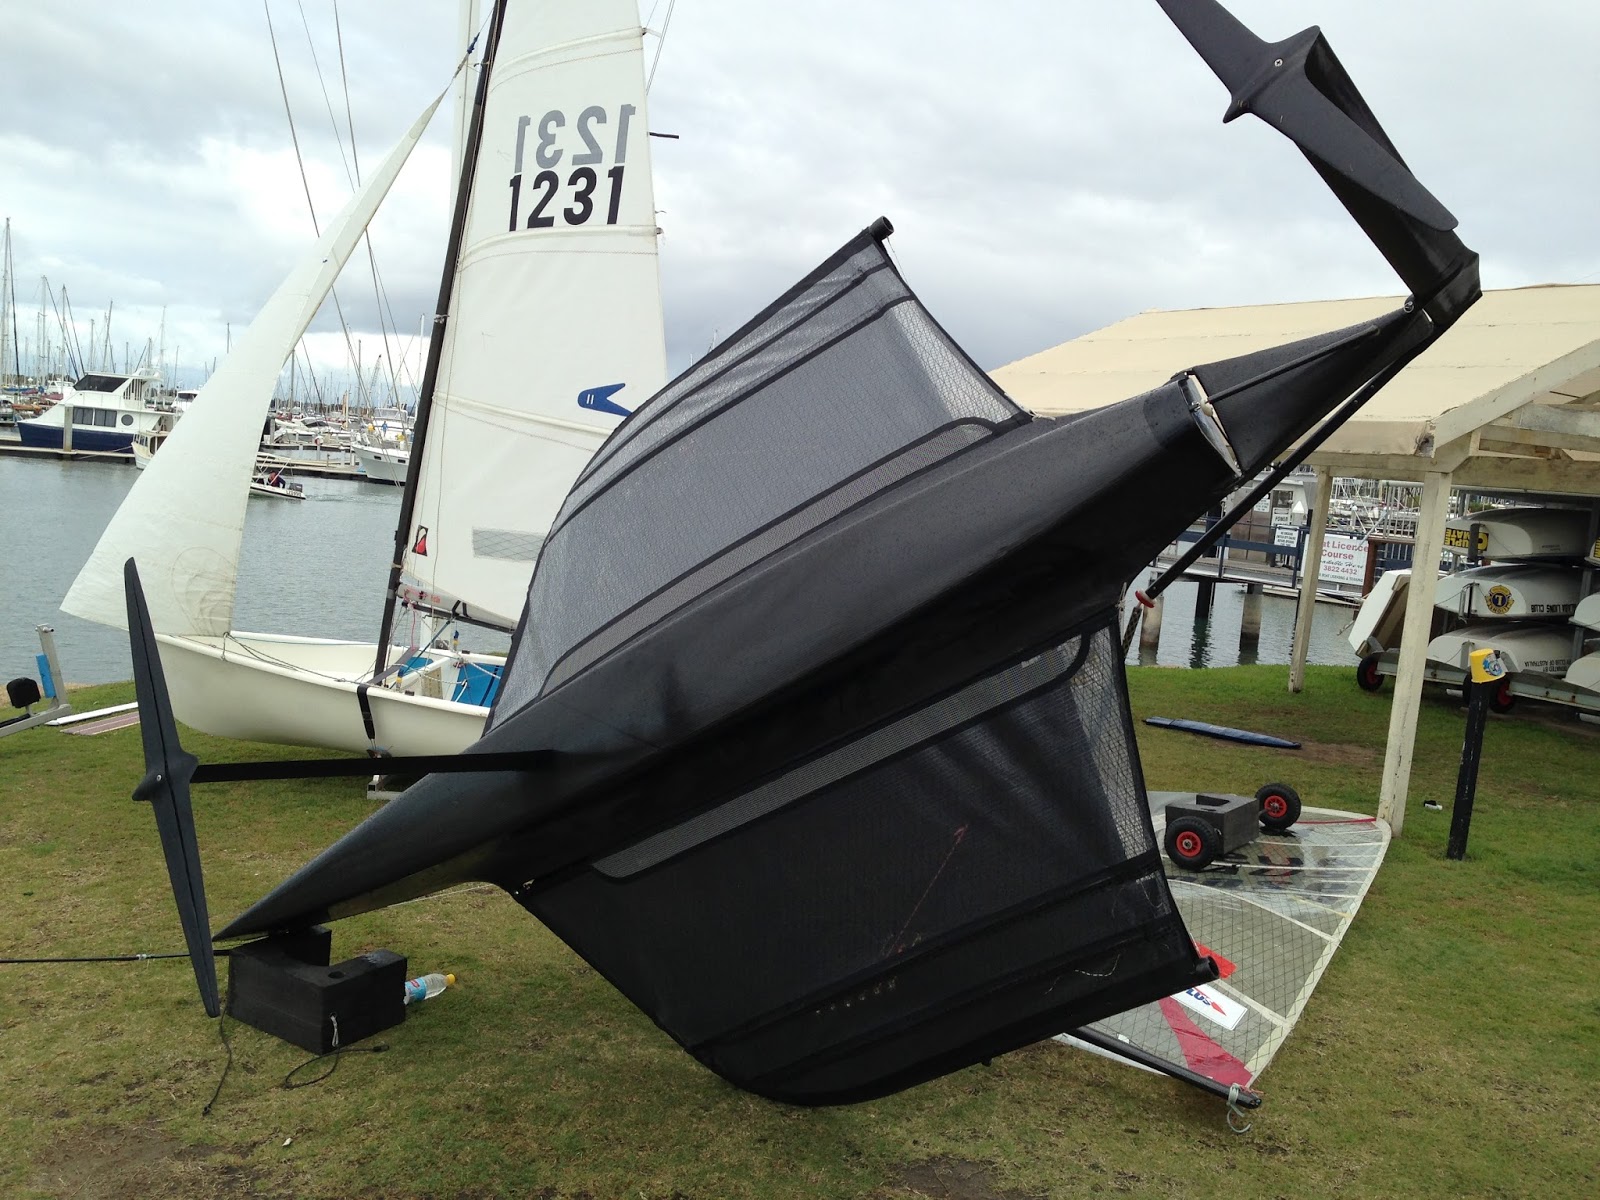 nick flutter's moth design blog: Sailing with the new tramps